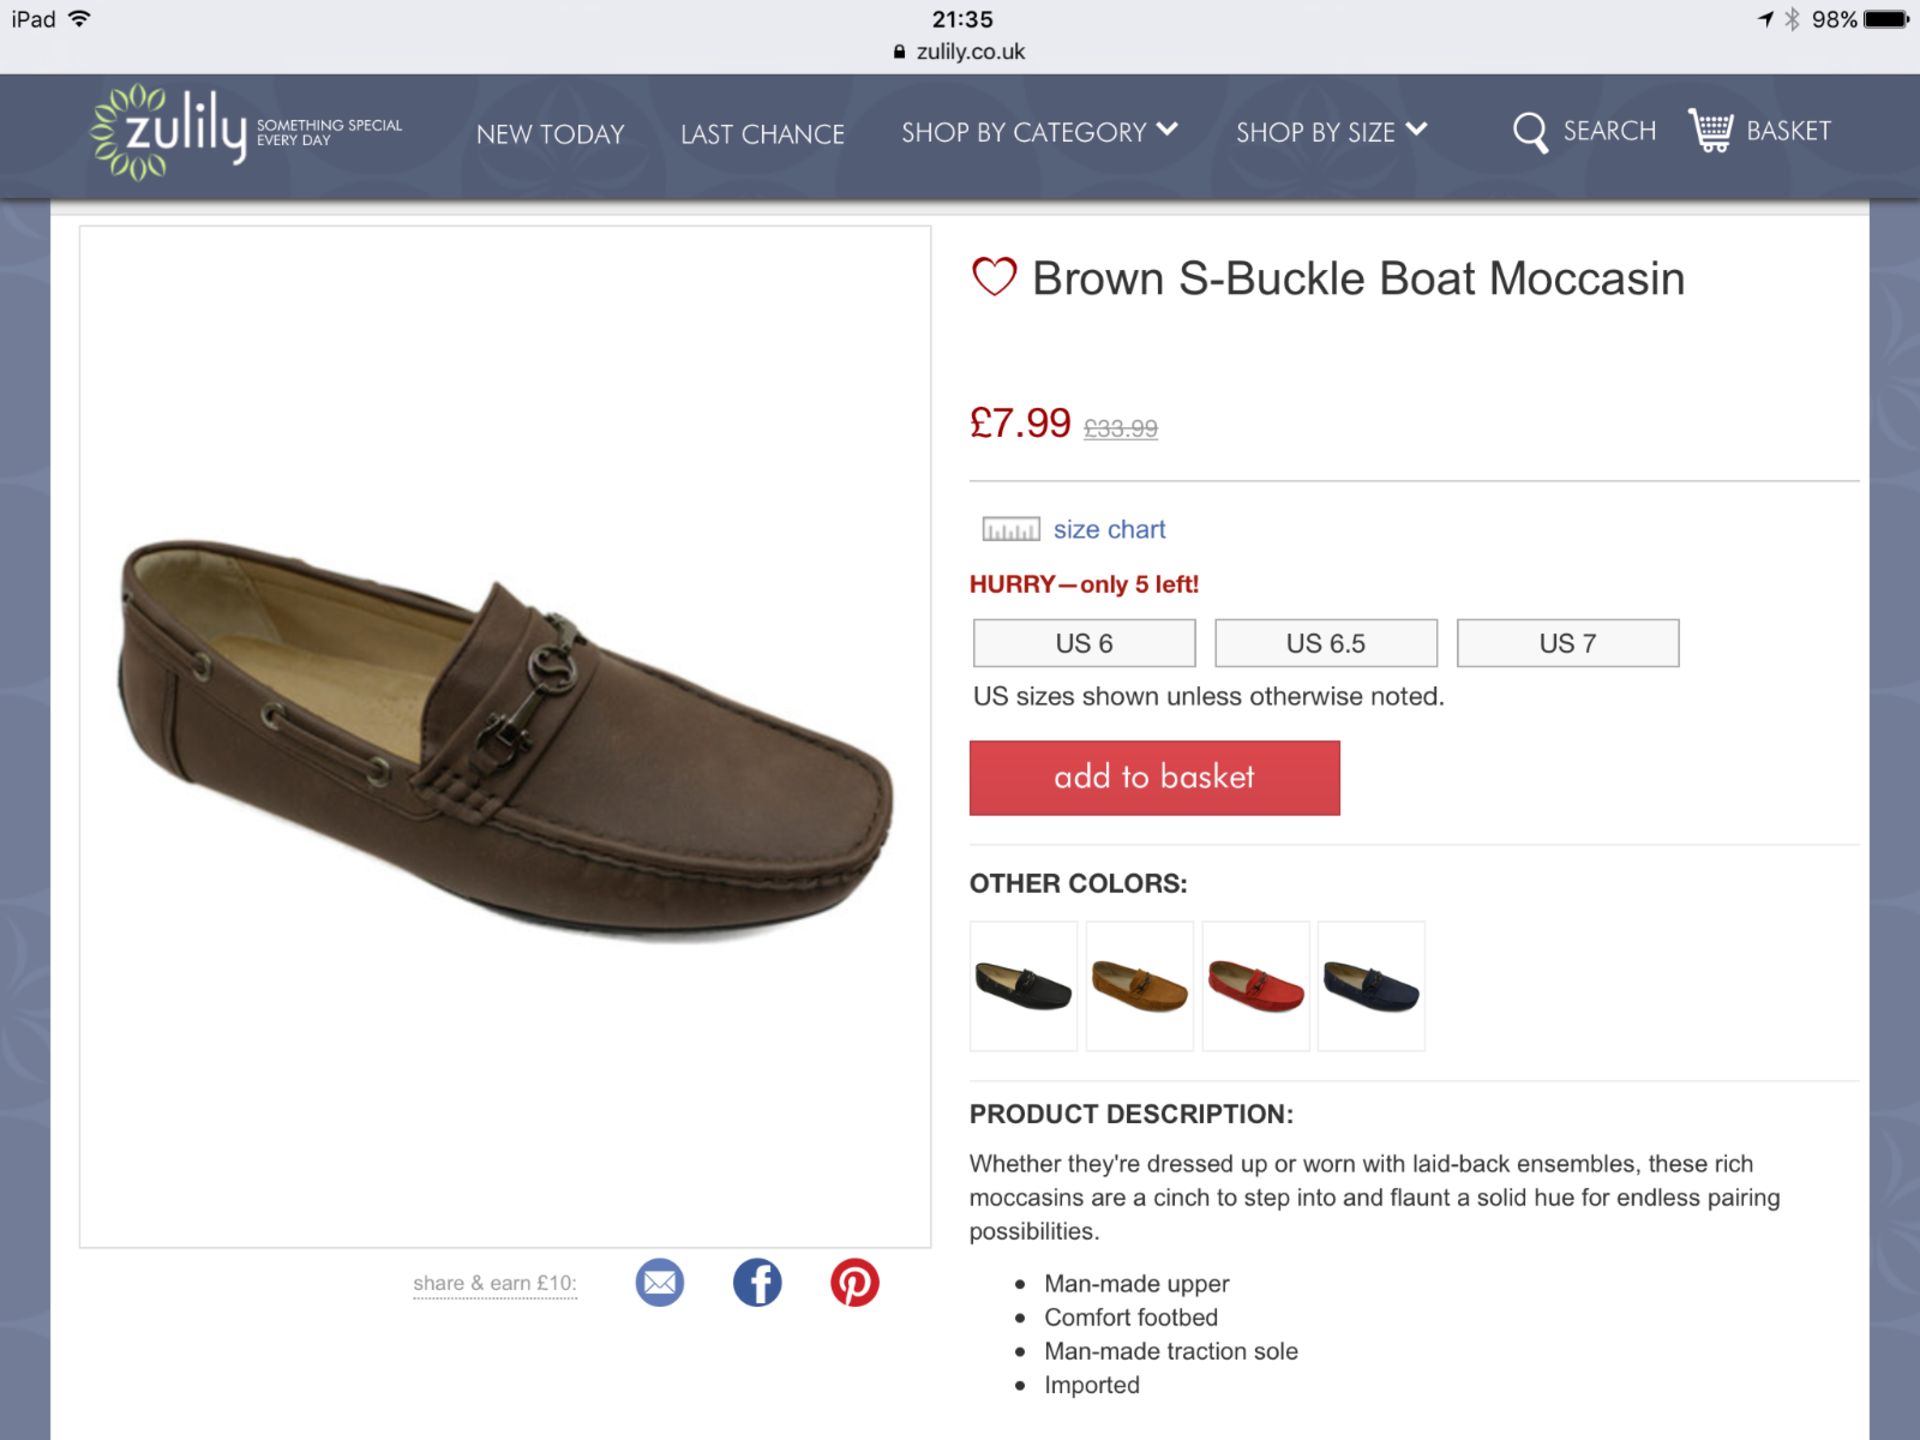 Oudihong Brown S-Buckle Men's Boat Moccasin, Size US 8/UK 7 (New with box) [Ref: 46966854] - Image 2 of 3